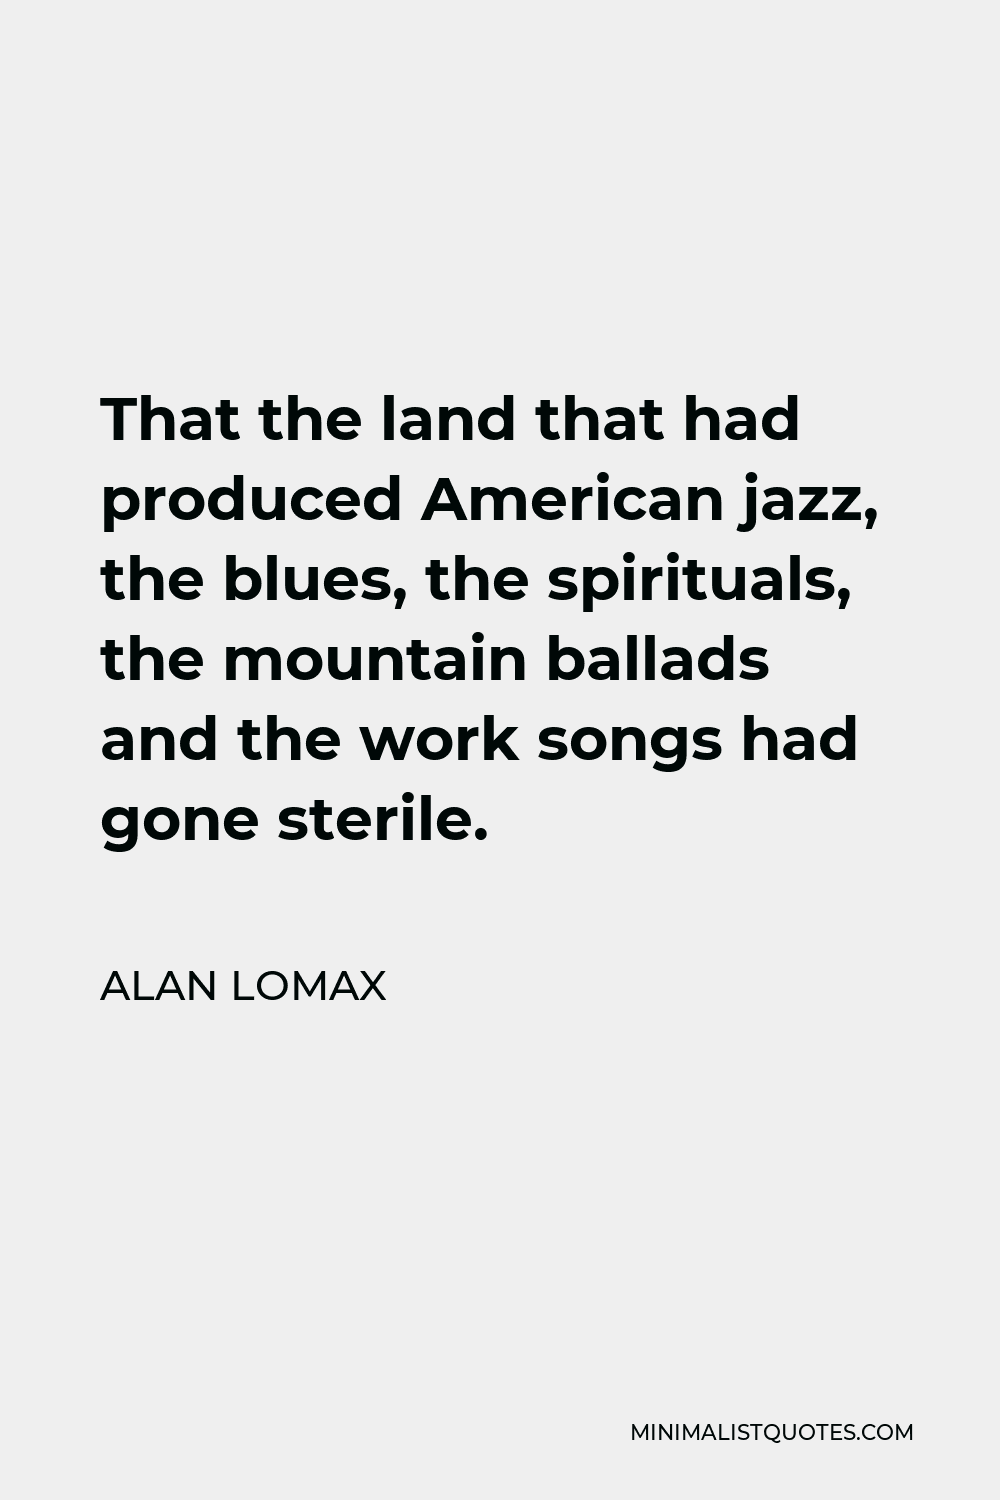 Alan Lomax Quote - That the land that had produced American jazz, the blues, the spirituals, the mountain ballads and the work songs had gone sterile.